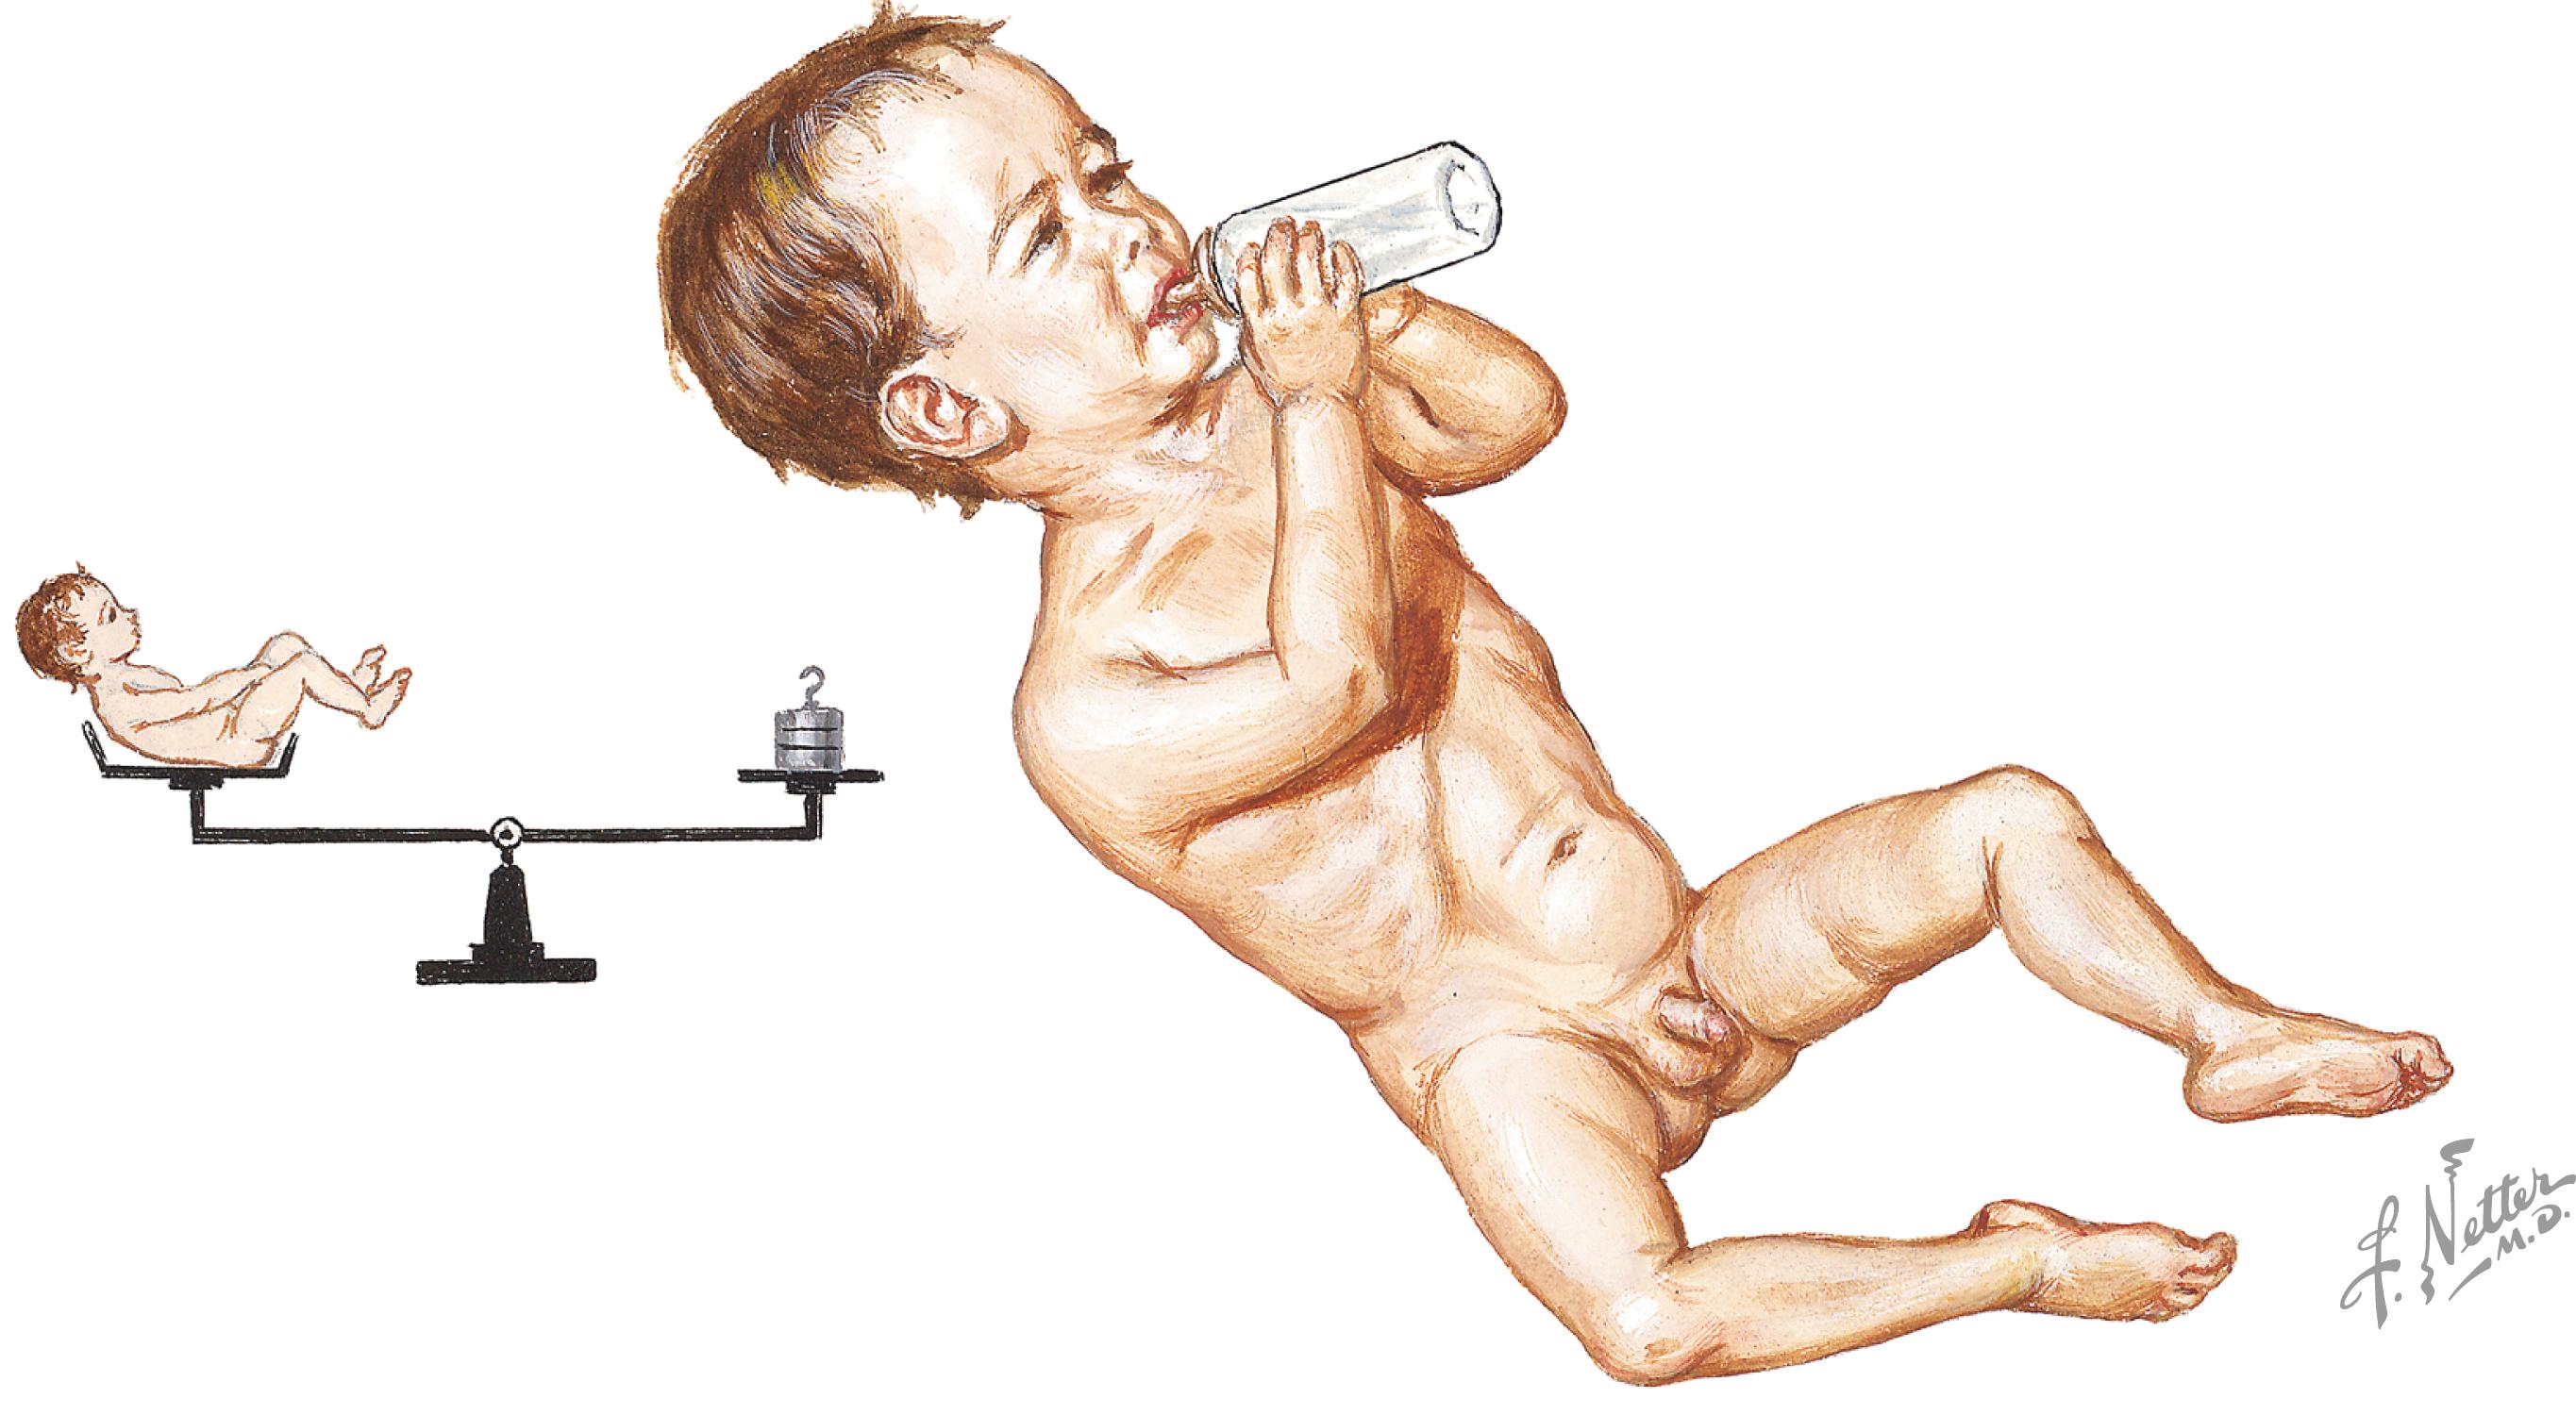 Fig. 9.1, Low birth rate and use of formula rather than breastfeeding are risk factors for rotavirus infection in infants. The bottle-fed boy shows signs of dehydration from rotavirus infection.